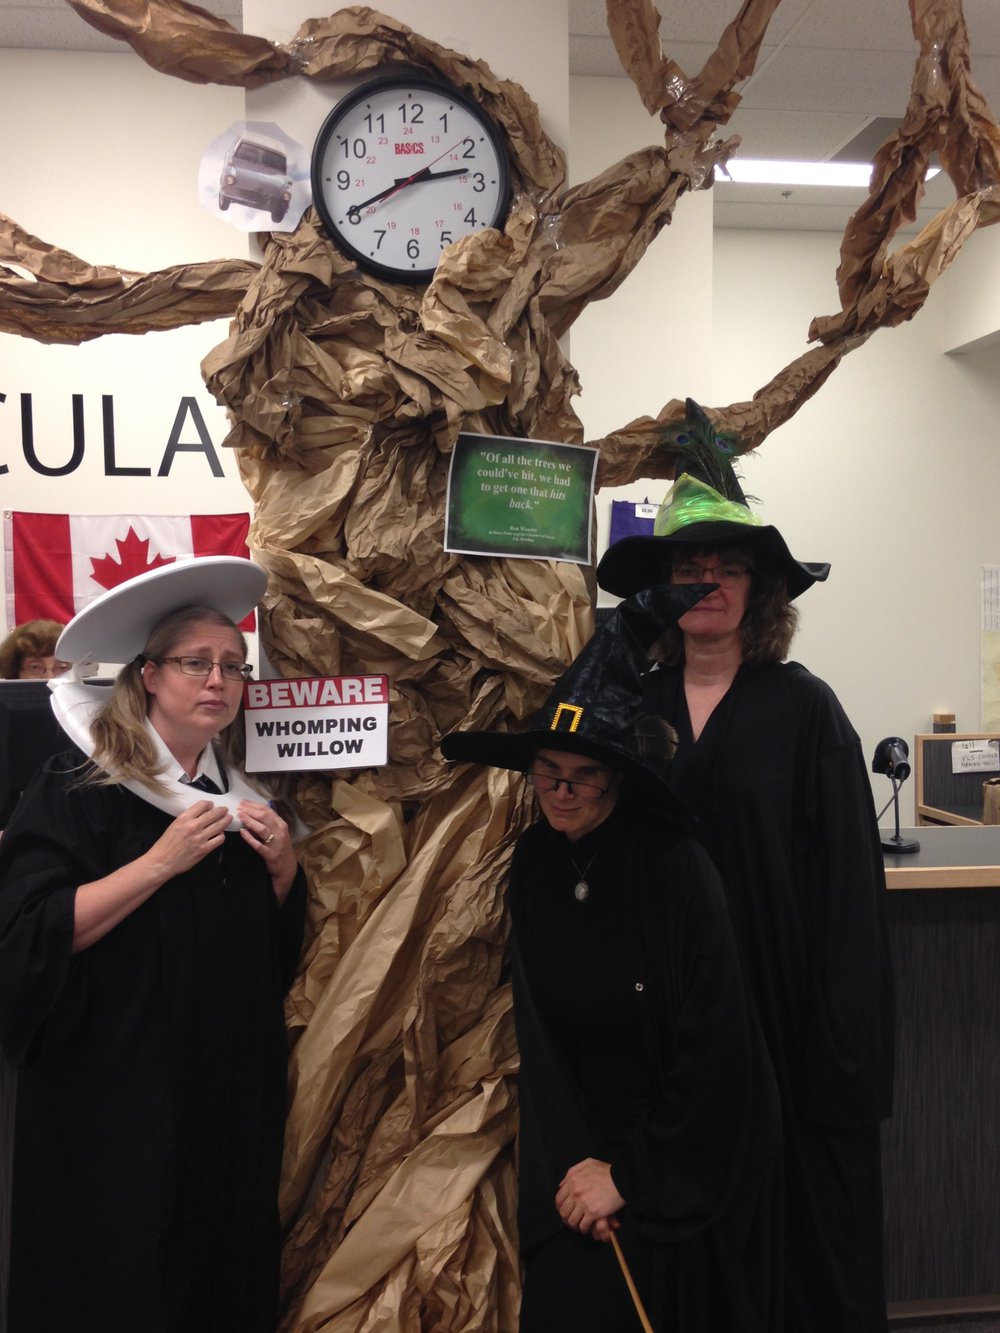 Three Peterborough Public Library staffers wearing Harry Potter related costumes